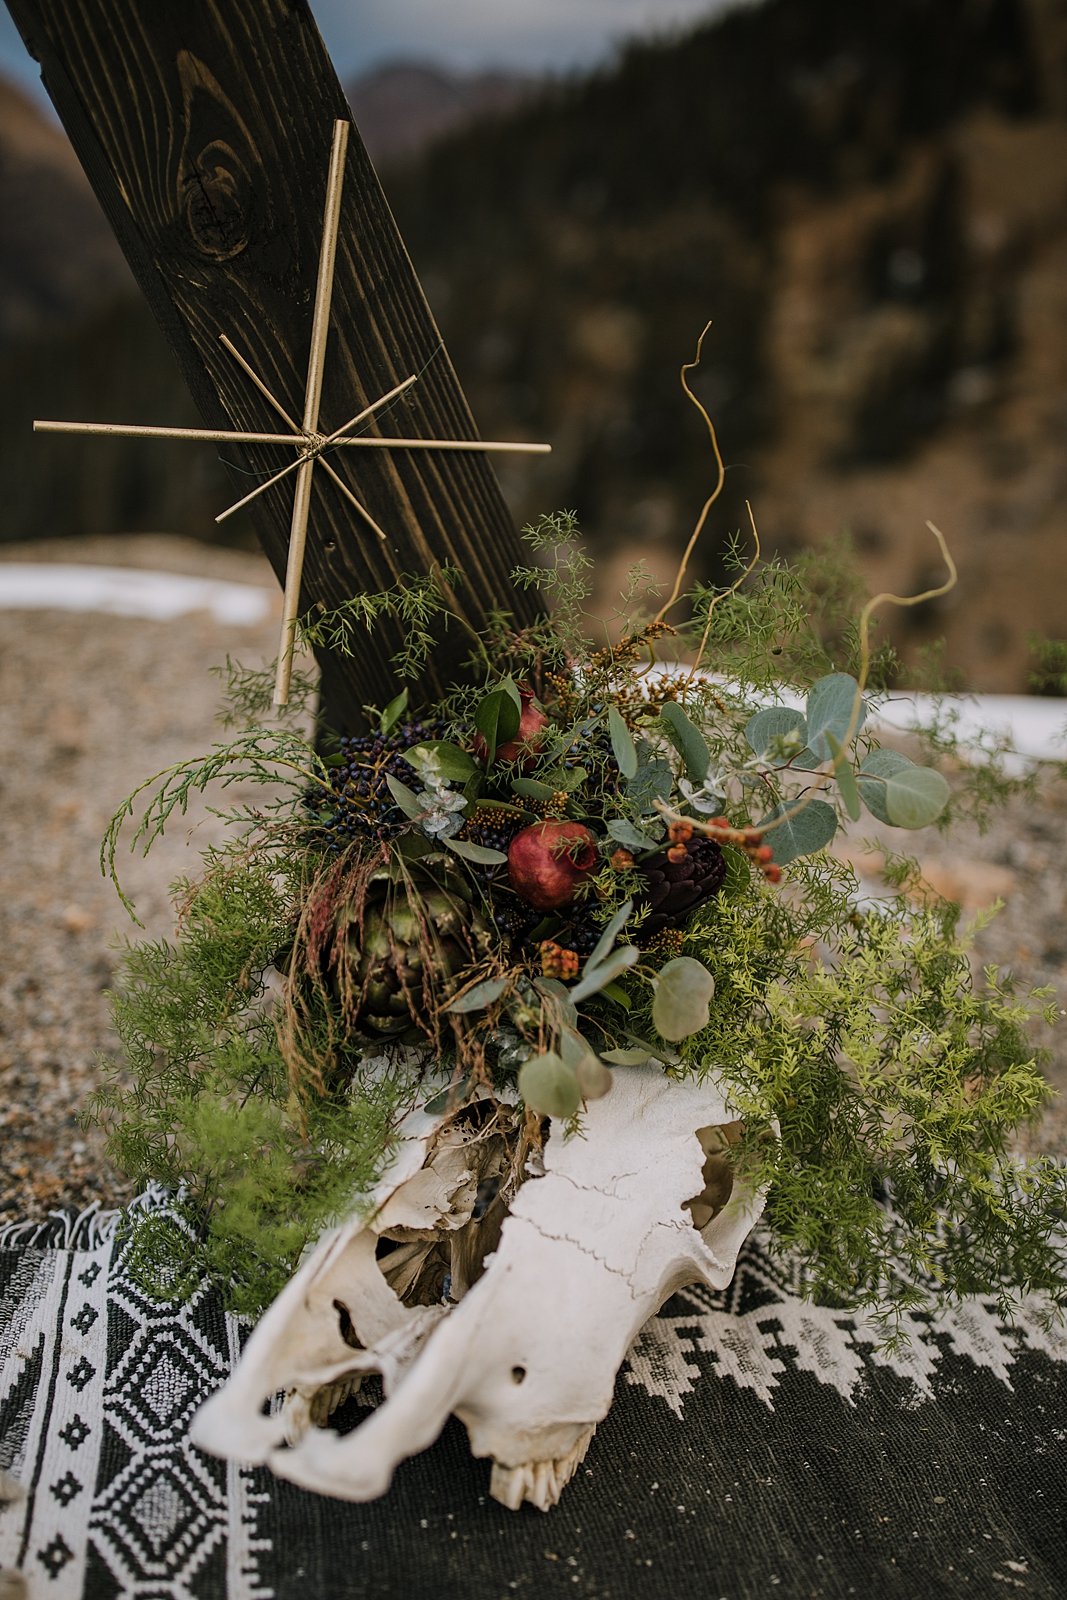 terrestrial wedding decor at the base of the arch, taxidermy wedding decorations, cattle skull wedding decor, animal skull wedding decor, florals with pomegranates, dried fruit and berry fall florals